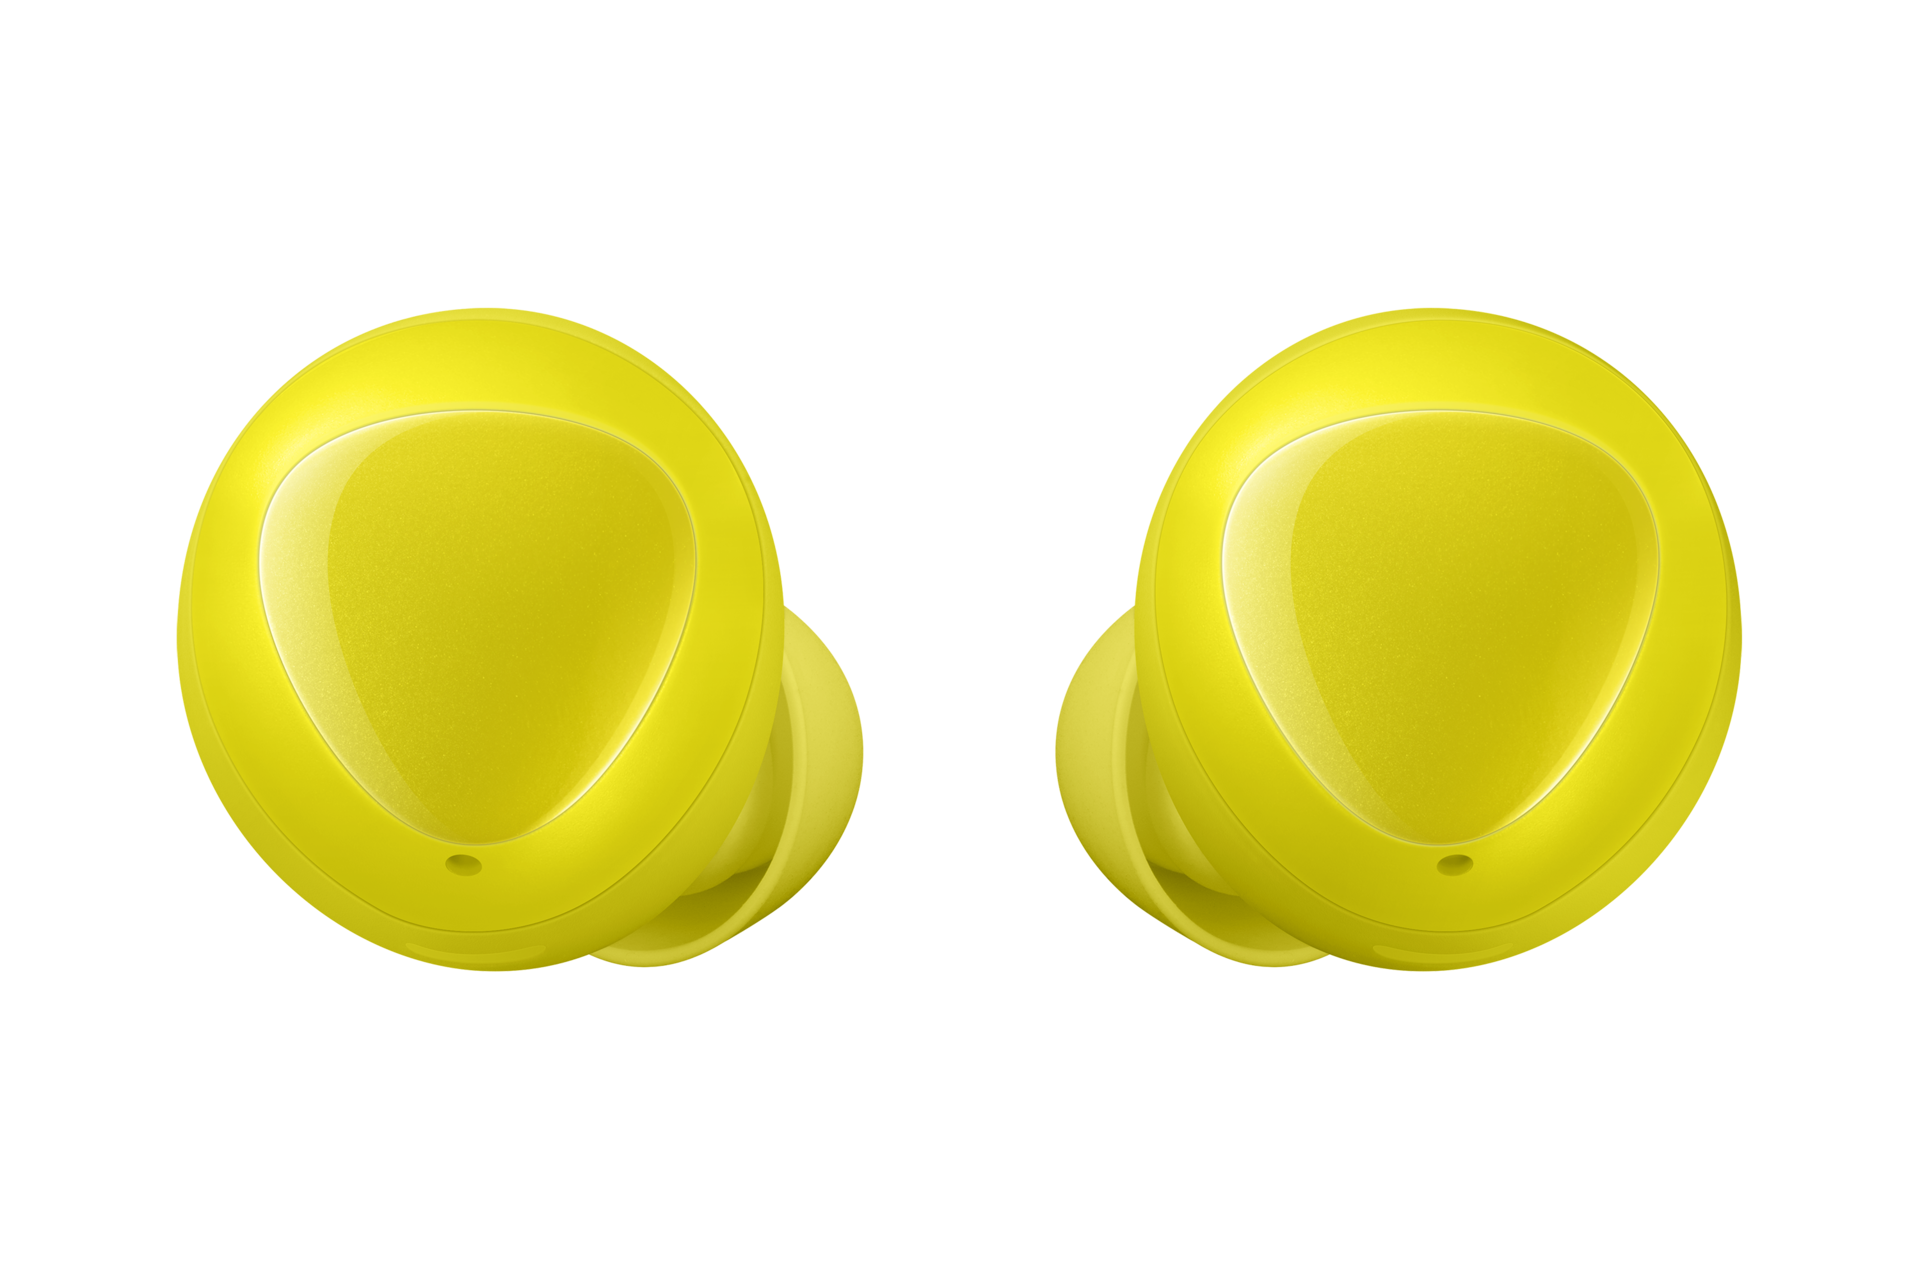 Galaxy Buds front yellow